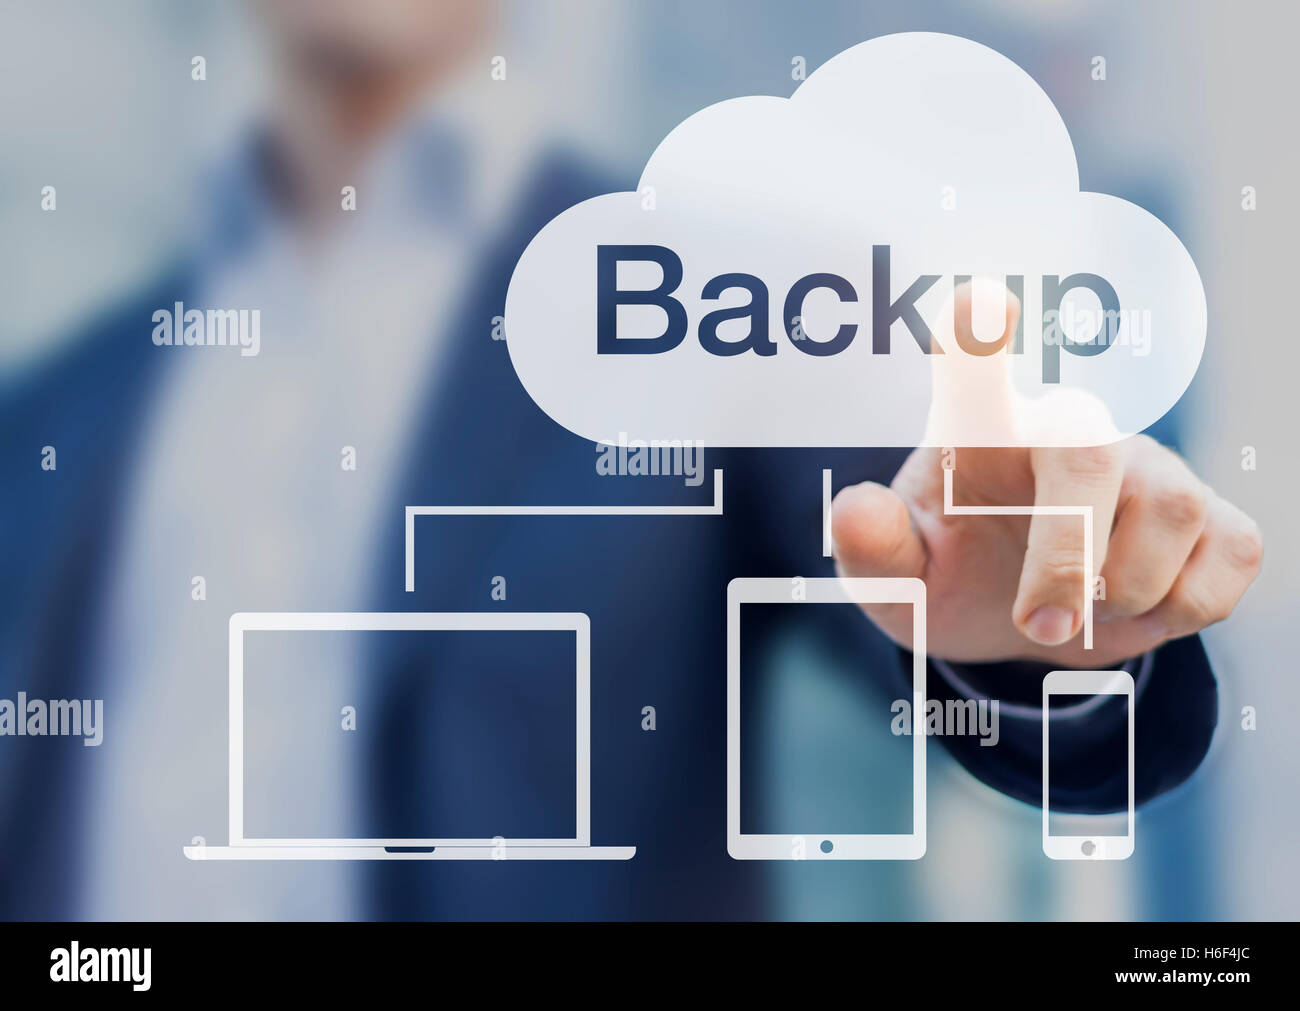 Backup button, concept about online file storage in the cloud from all devices Stock Photo